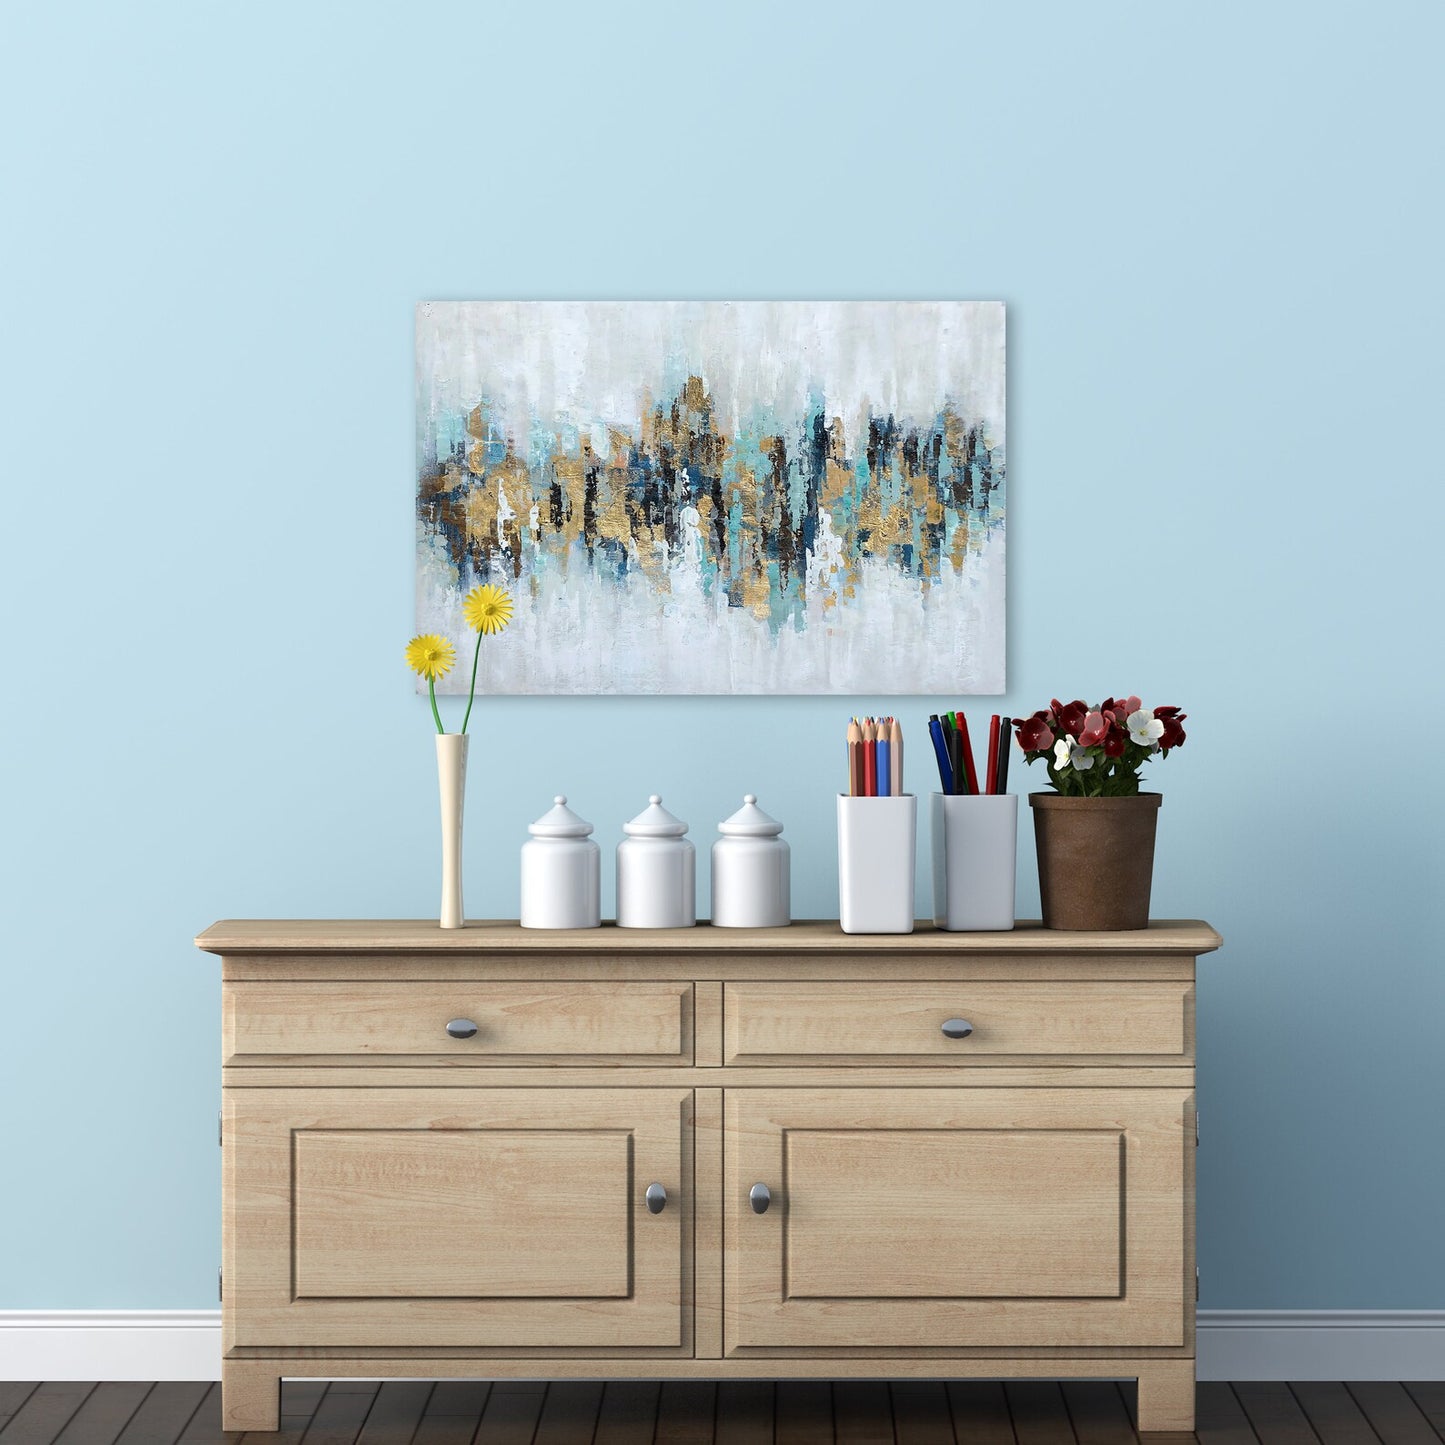 Hand-painted "Abstract Golden and Blue" Painting original art, Canvas Wall art for living room, bedroom, office - Wrapped Canvas Painting